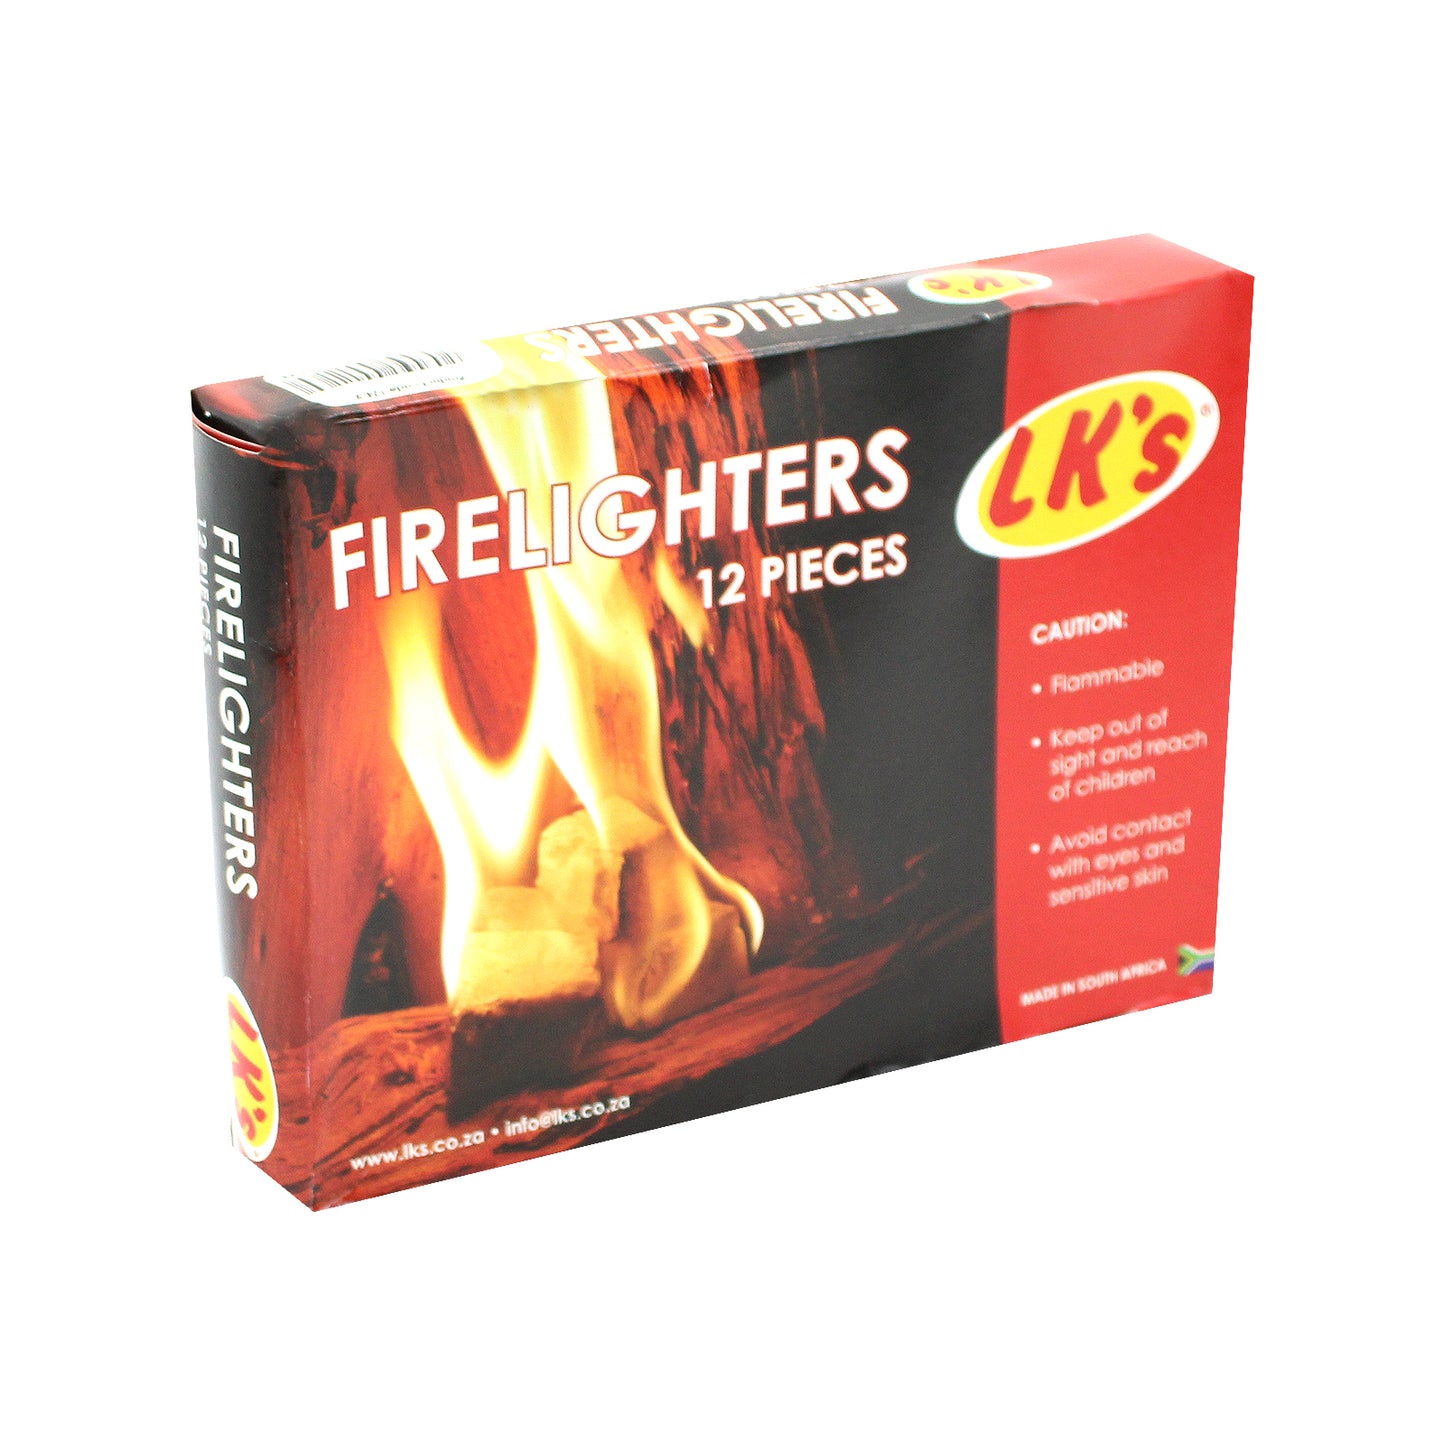 Pack of Firelighters Includes 12 Pieces